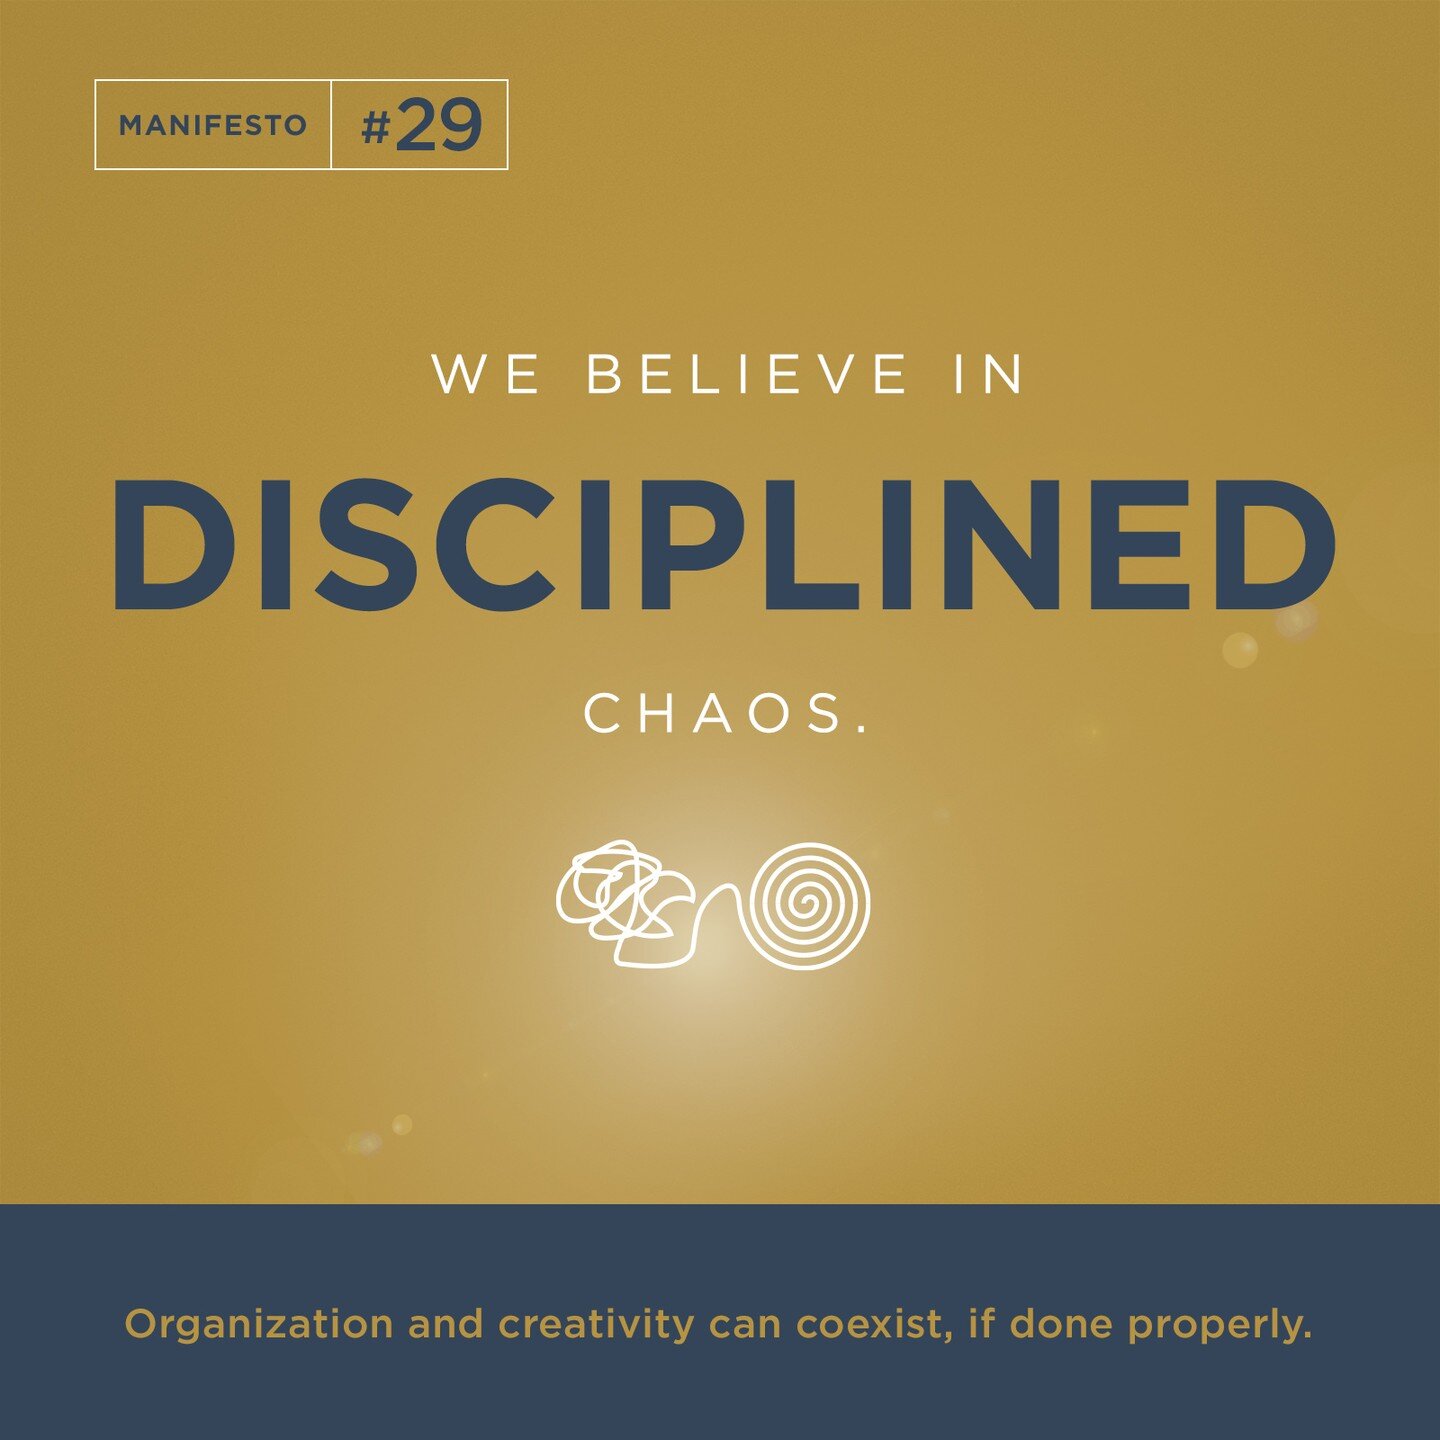 We believe in disciplined chaos. 

Organization and creativity can coexist, if done properly. 

   

#WeBelieve #Brand33 #B33Manifesto #Brand #Marketing